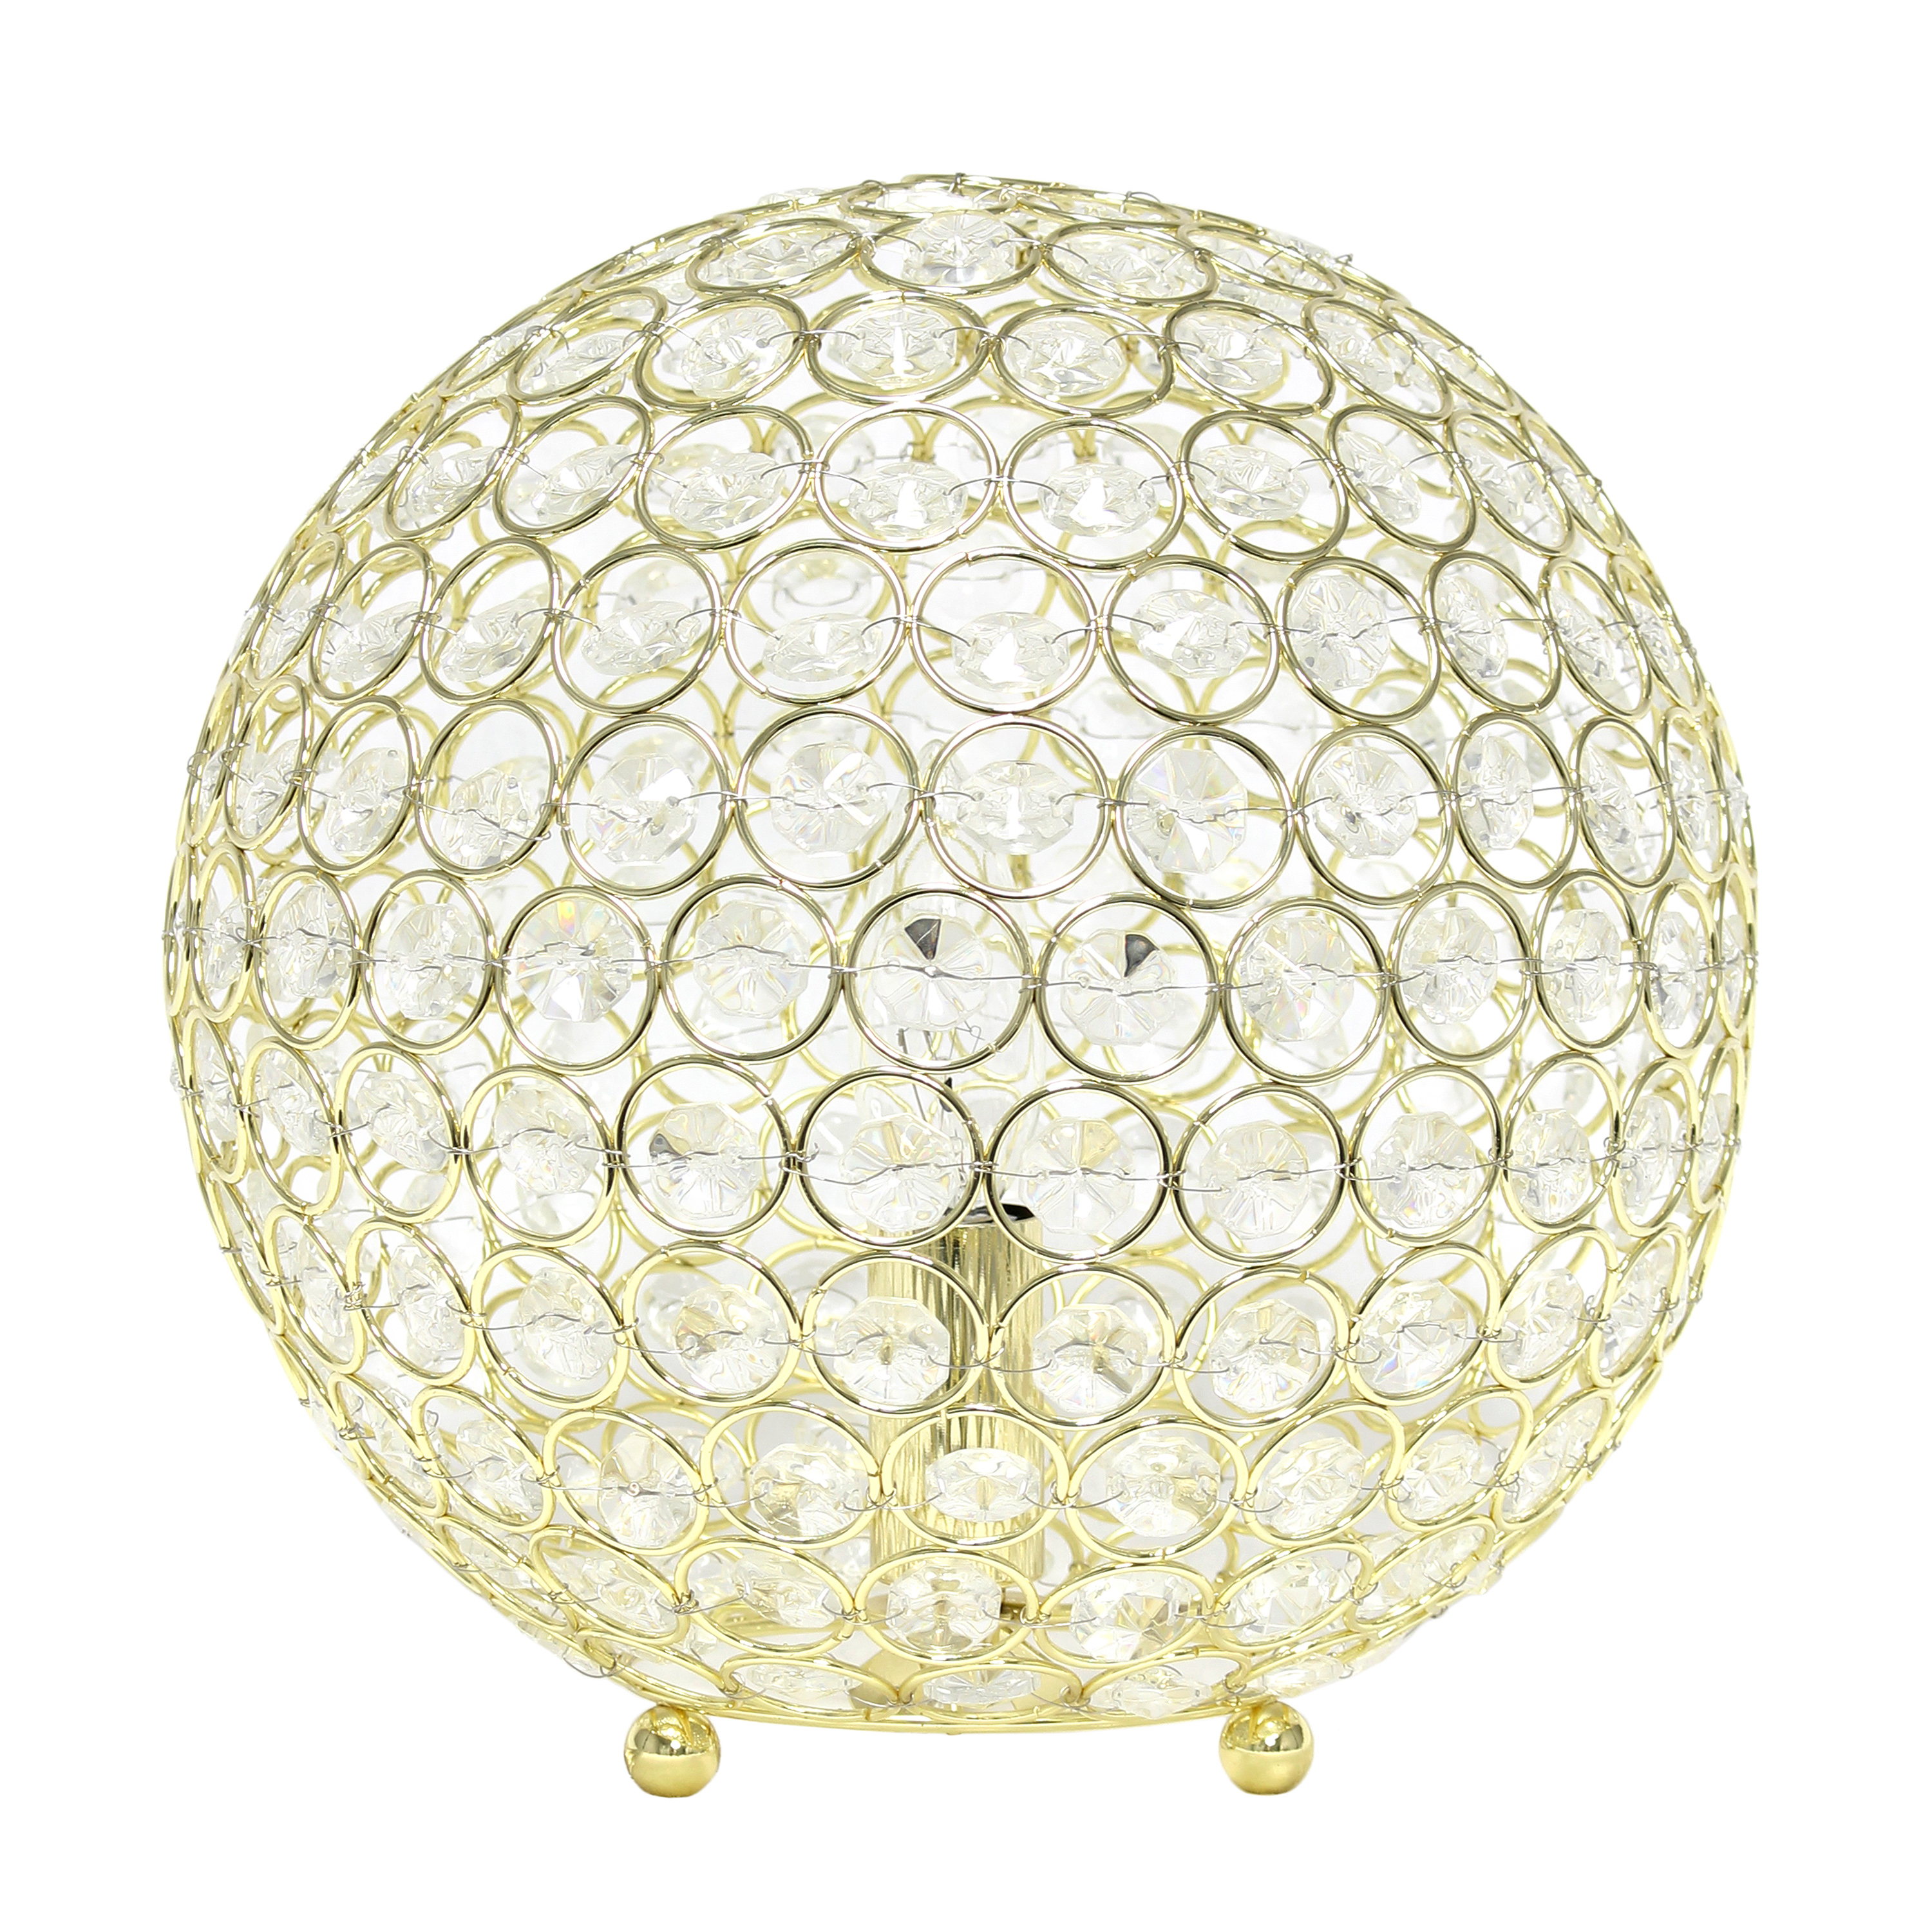 Elegant Designs Elipse 10 Inch Crystal Ball Sequin Table Lamp, Gold